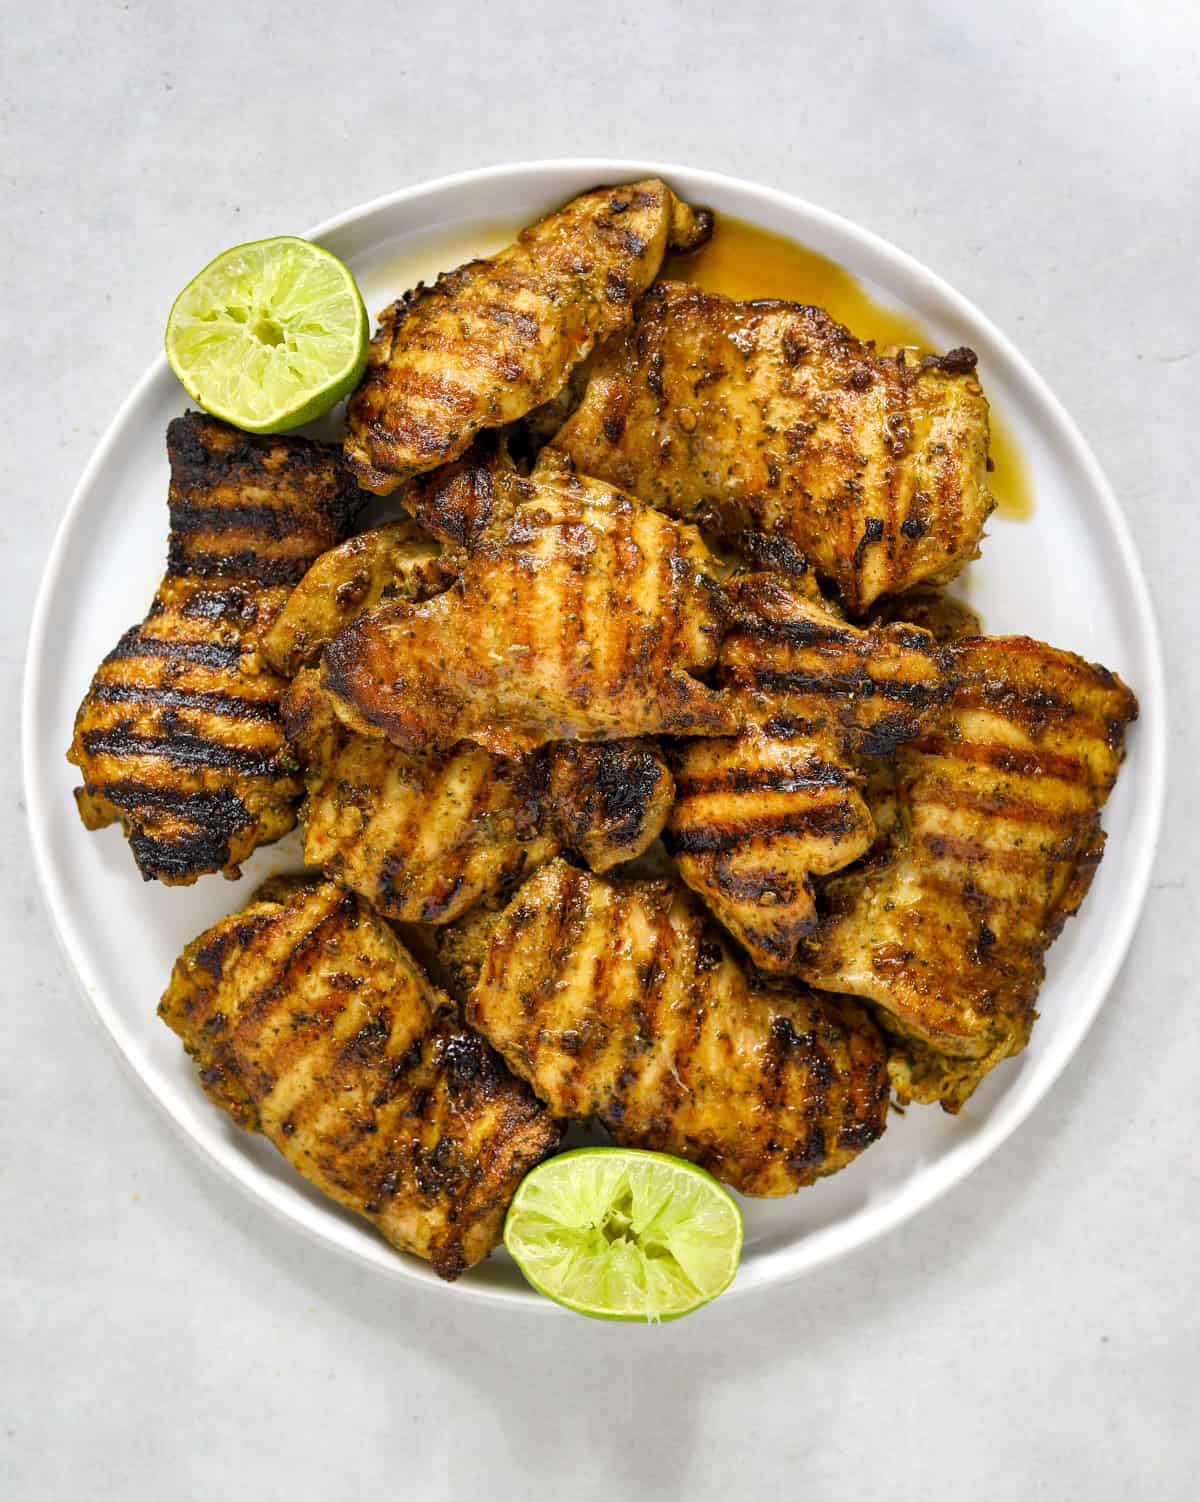 A white plate filled with bright and glossy grilled chicken thighs with black and brown grill marks.